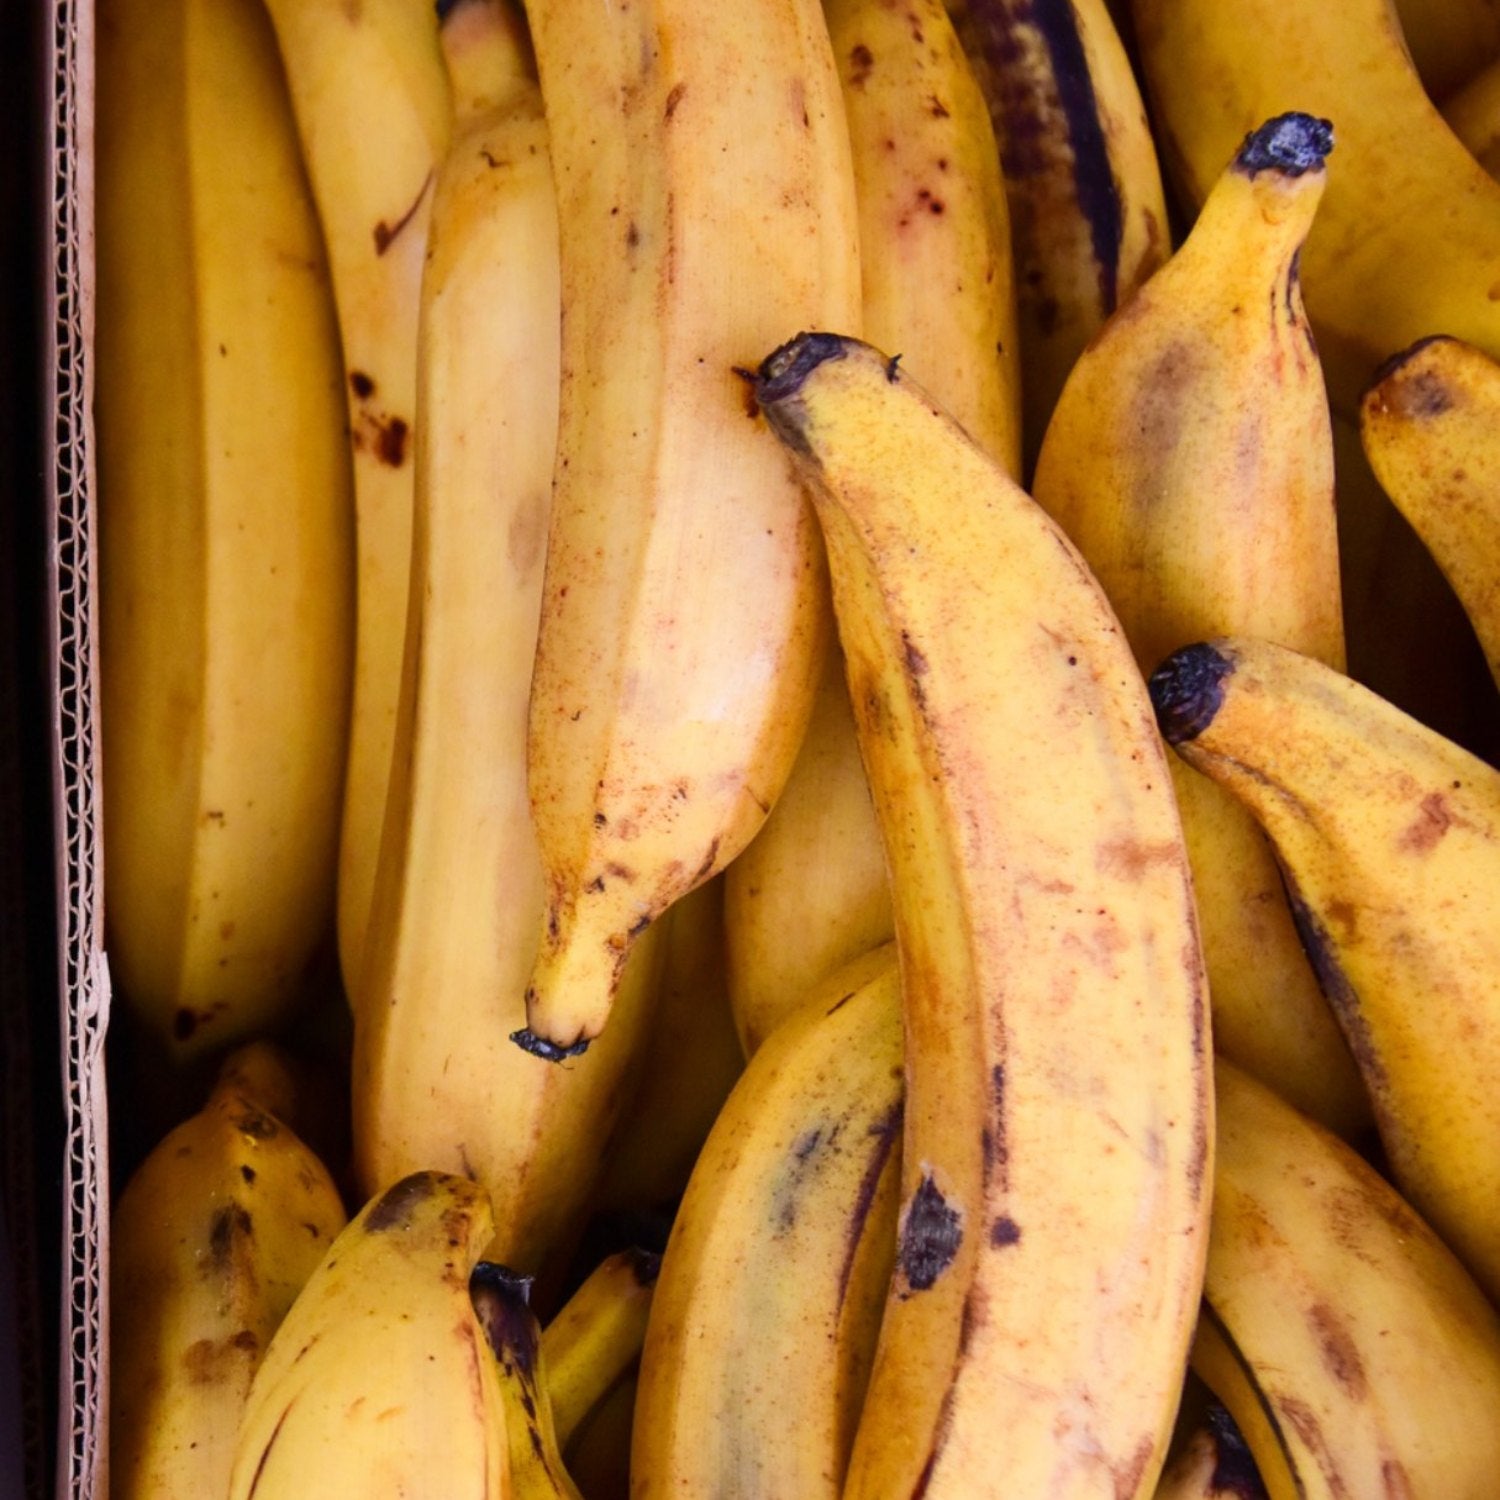 Russia Blinks on Banana Ban as Ecuador Swaps Weaponry With US